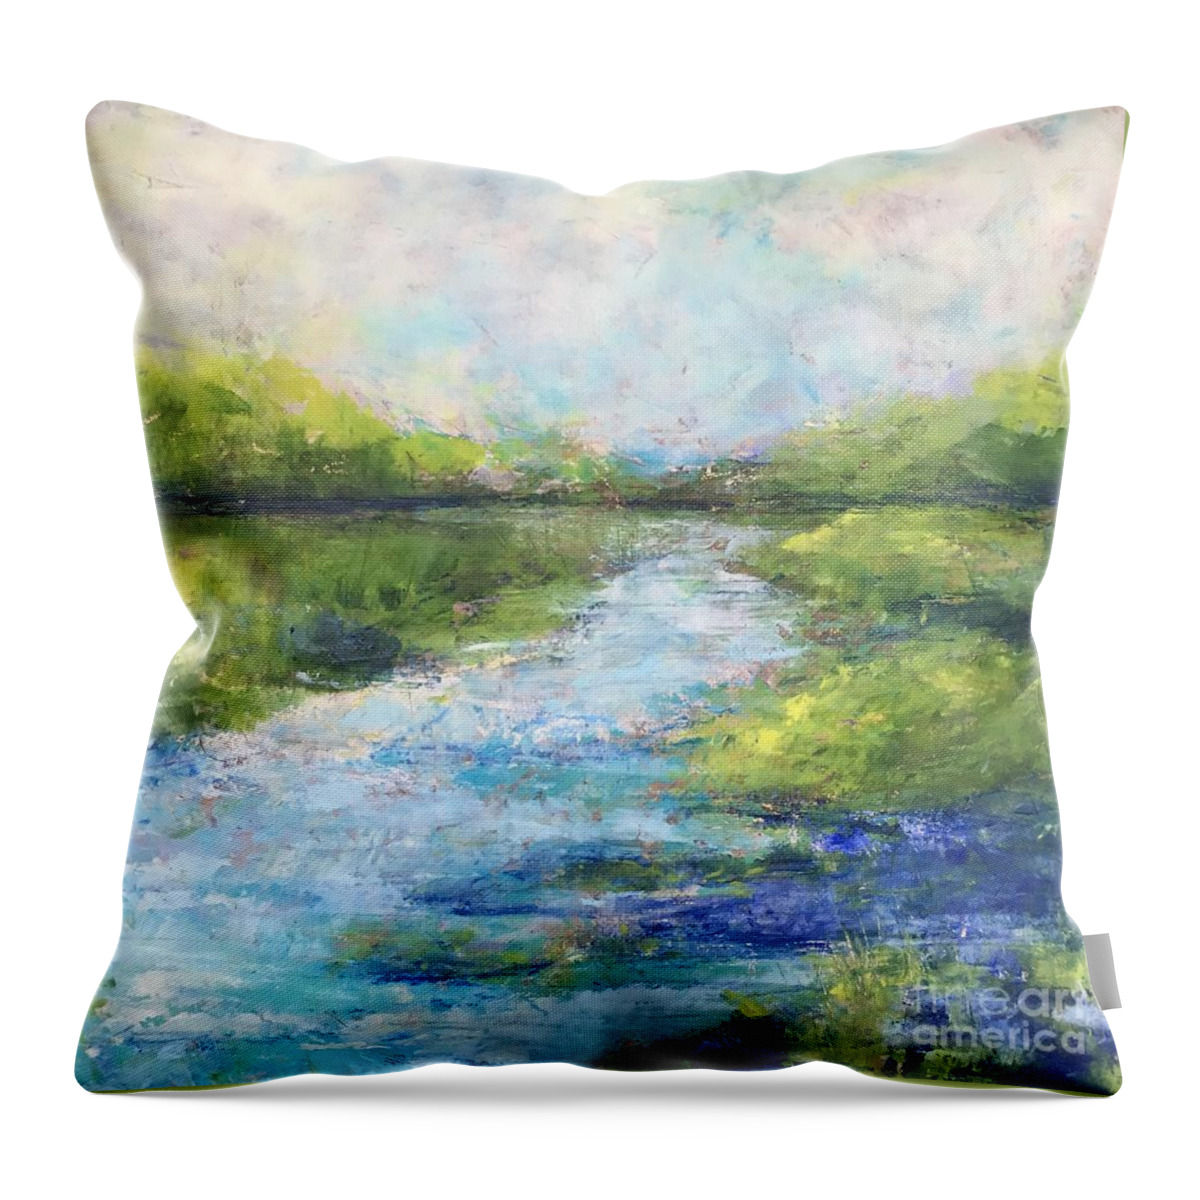 Oil Throw Pillow featuring the painting Morning Glow by Christine Chin-Fook